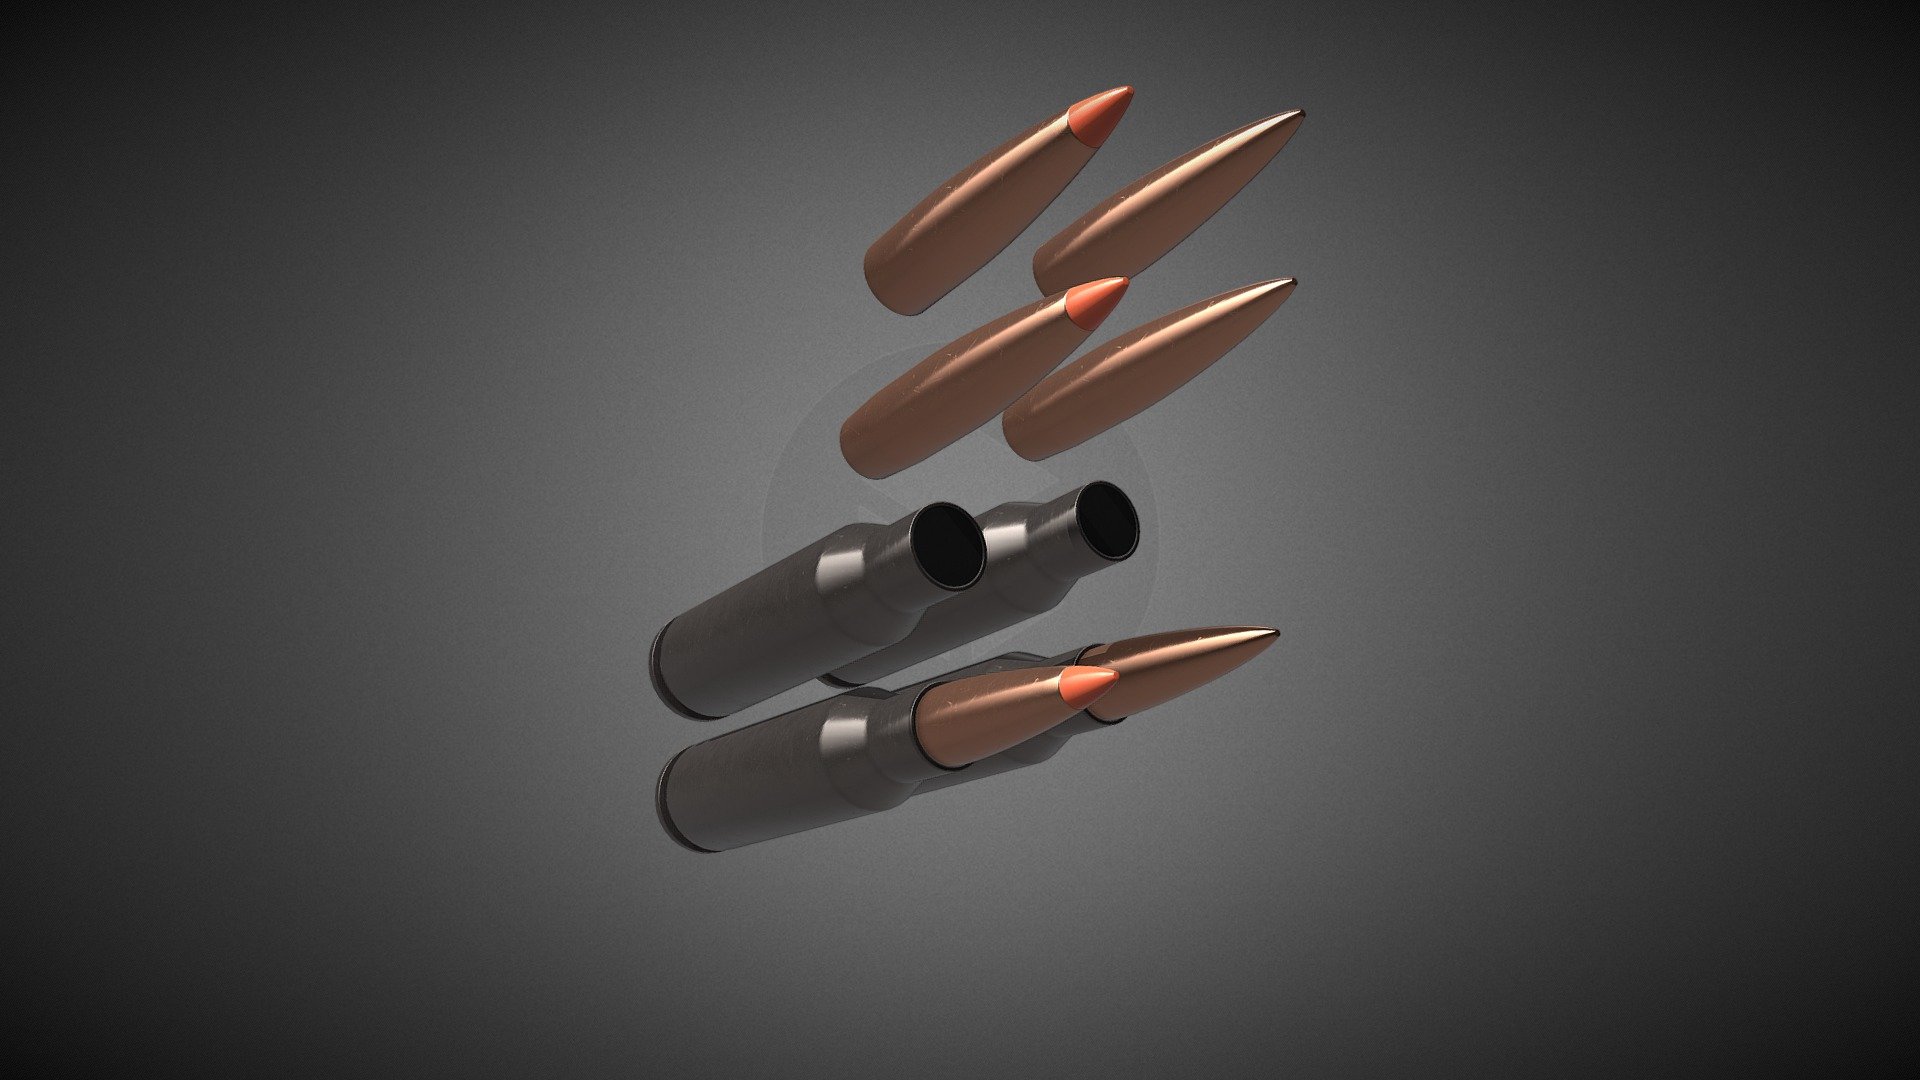 5.45x39mm rimless bottlenecked intermediate Cartridge, used by AK-74 pattern rifles. Introduced in 1974 by the Soviet Union to replace the previously used AK-47 chambered in 7.62x39mm.



This Asset includes two different Projectile Types, Flat-Based and Boattail Bullets with two Texture Sets for orange color tipped &ldquo;Arrow Head